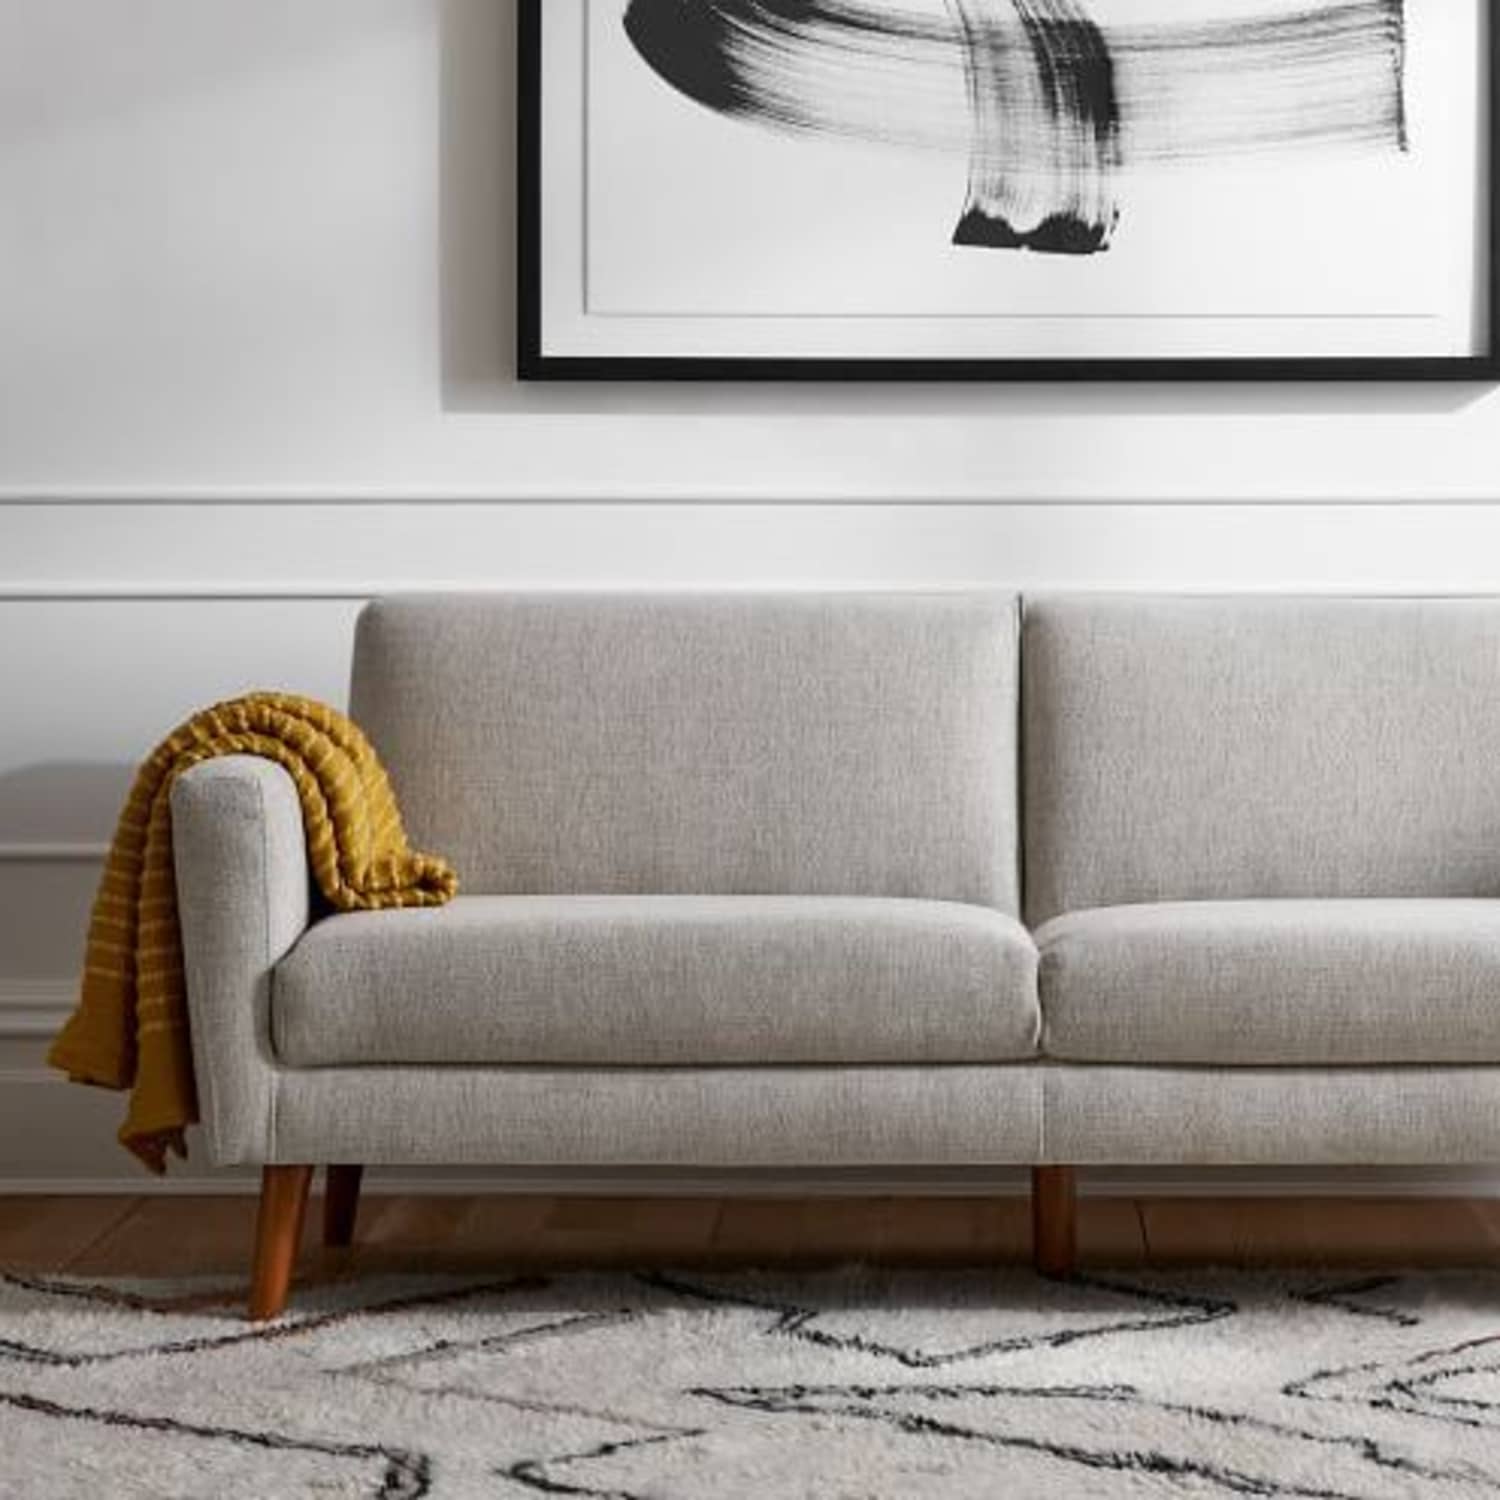 West Elm Cheap Sofa: Oliver Sofa Review | Apartment Therapy